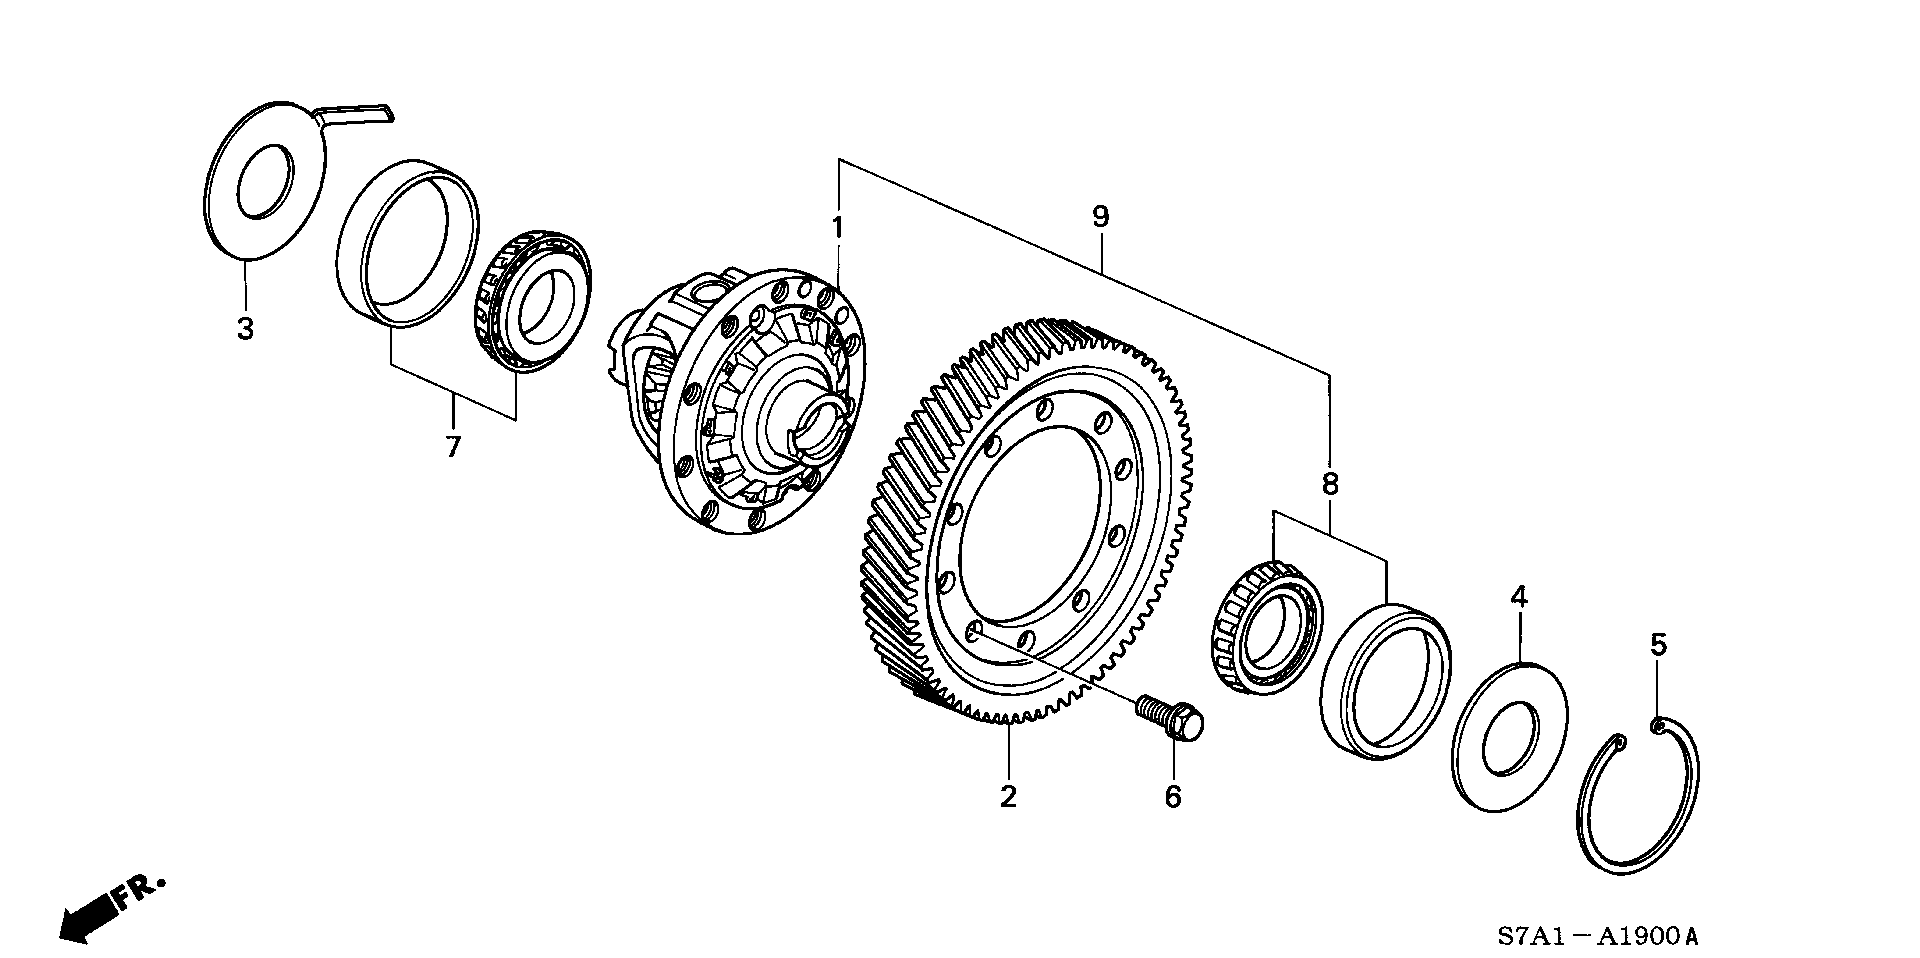 DIFFERENTIAL(2.0L) (2WD)